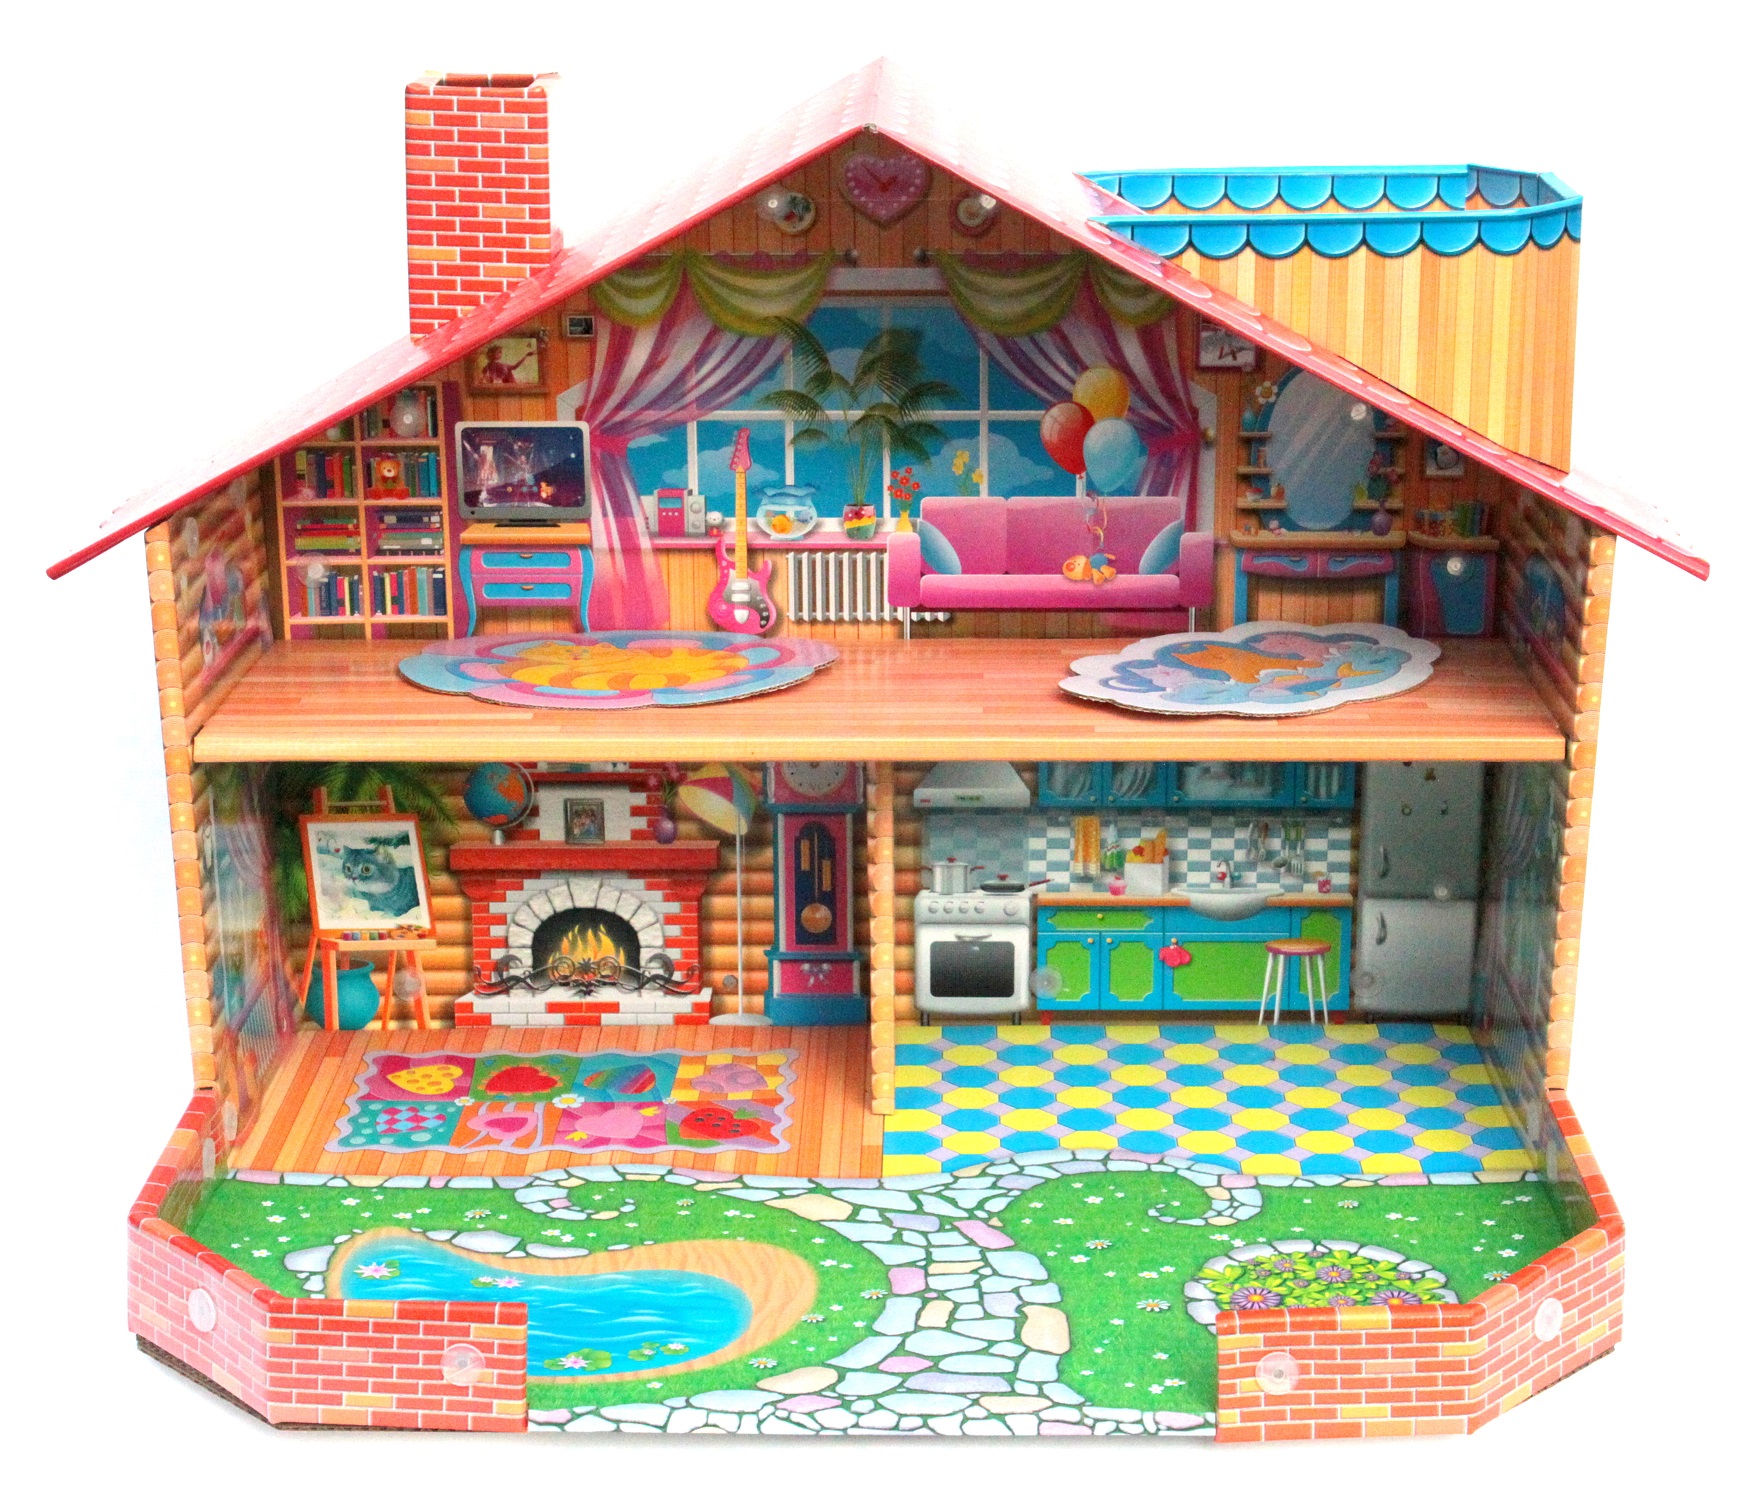 My Designer Doll's House to Make and Decorate